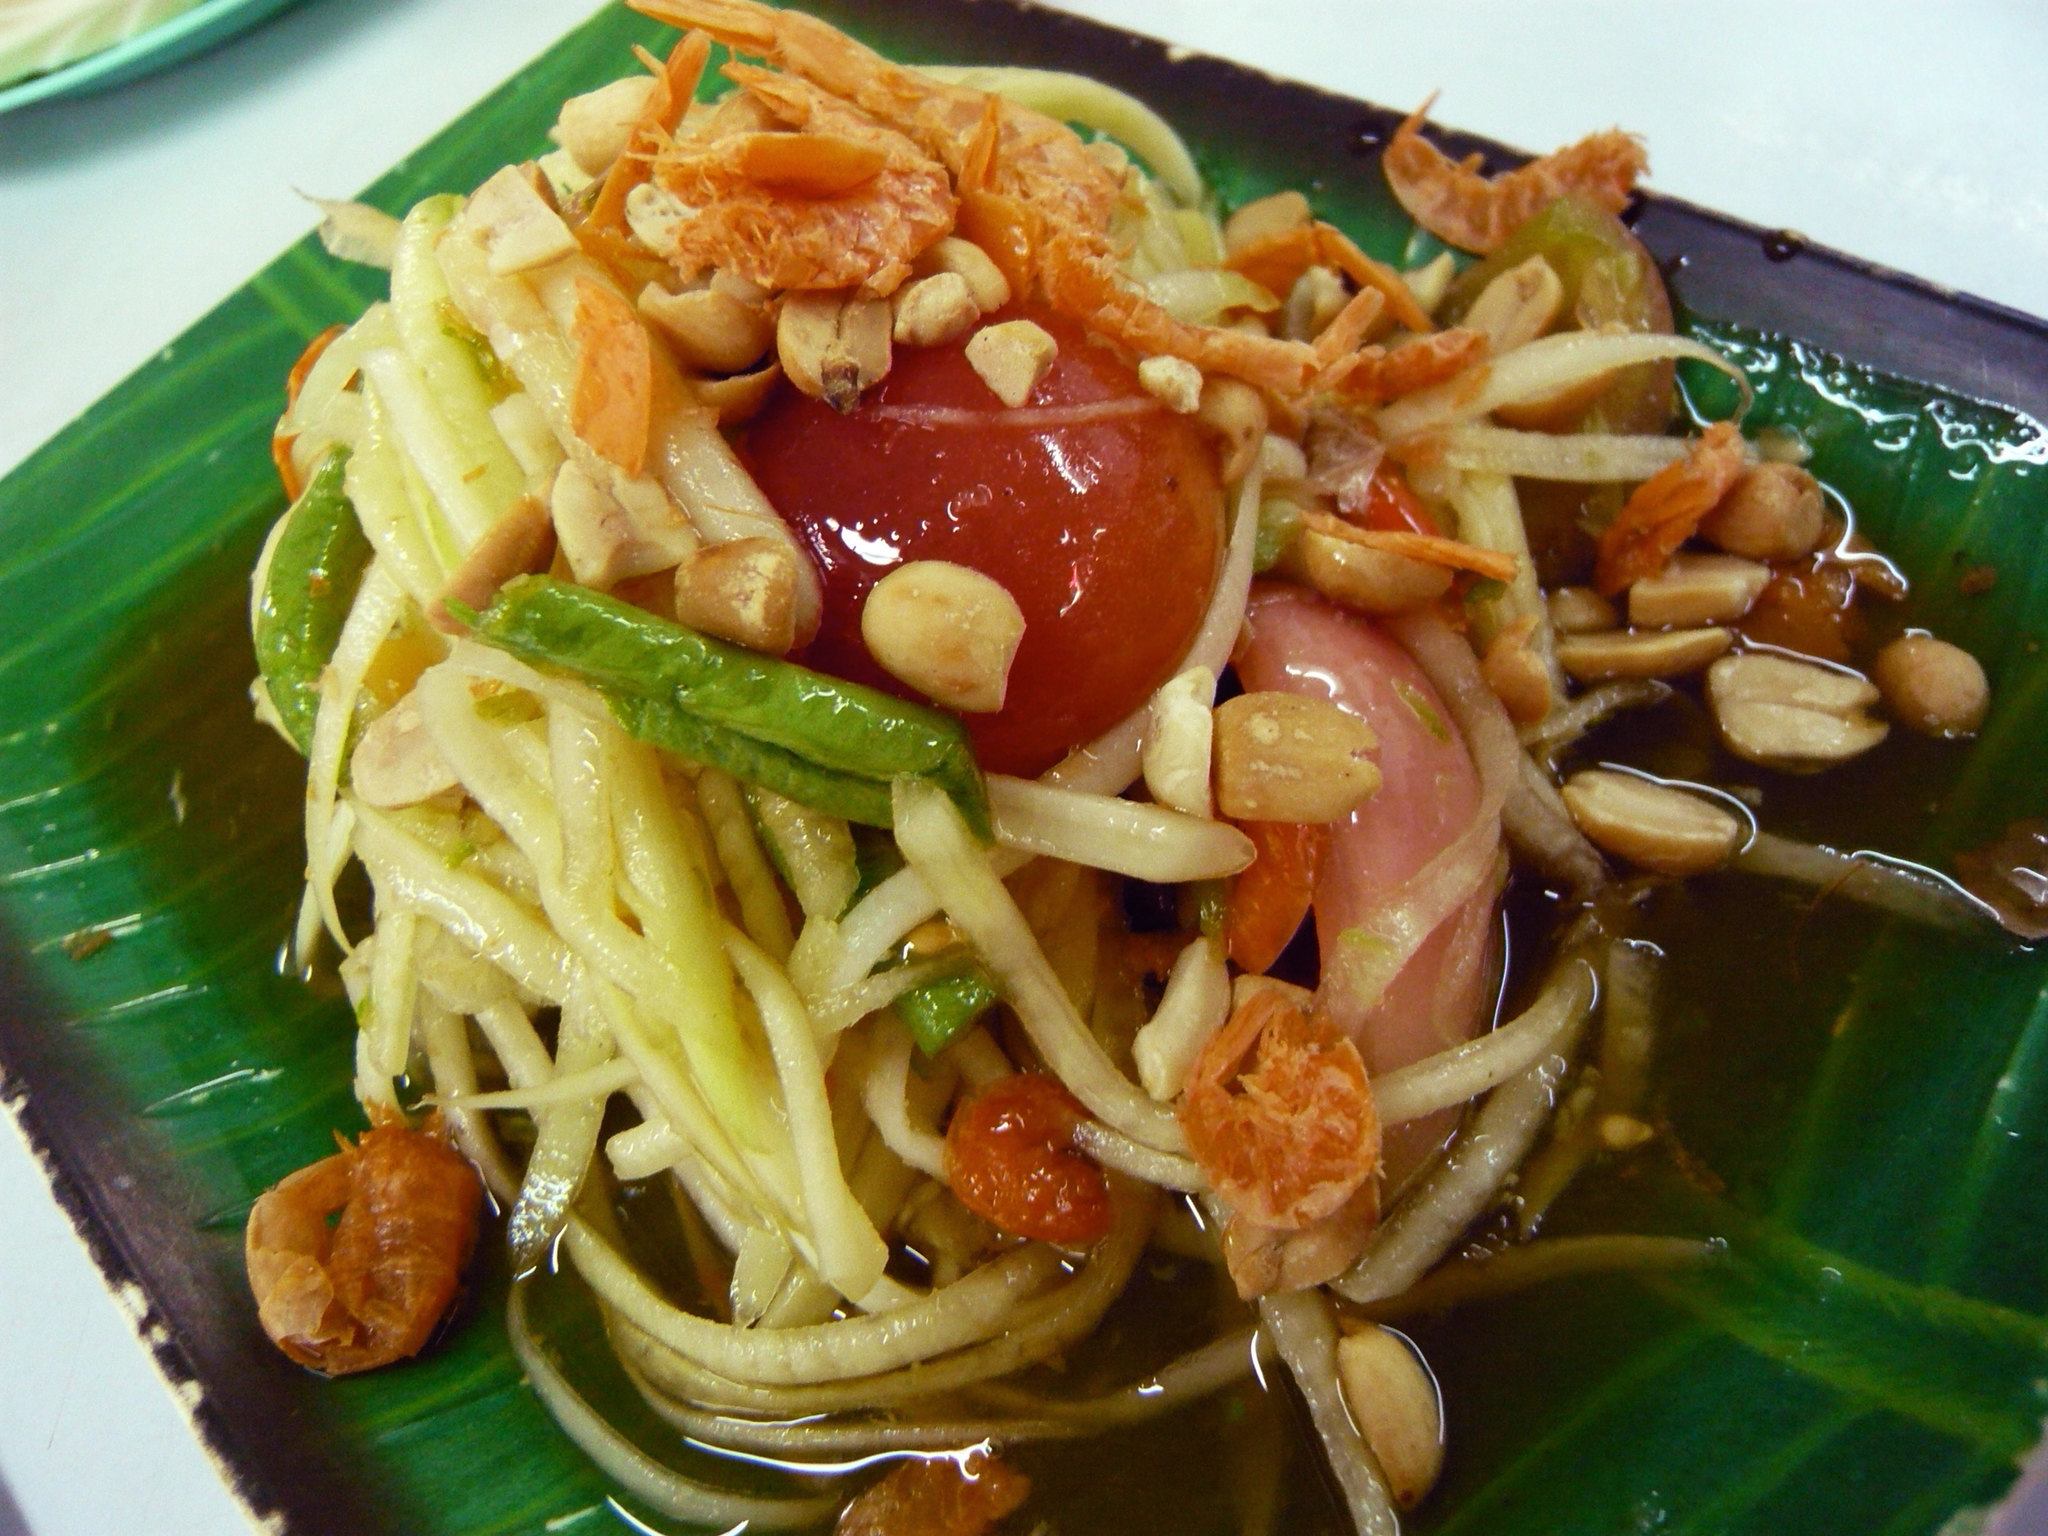 Asian Cuisine 15 Types of Thailand Dishes You Have to Try in Bangkok